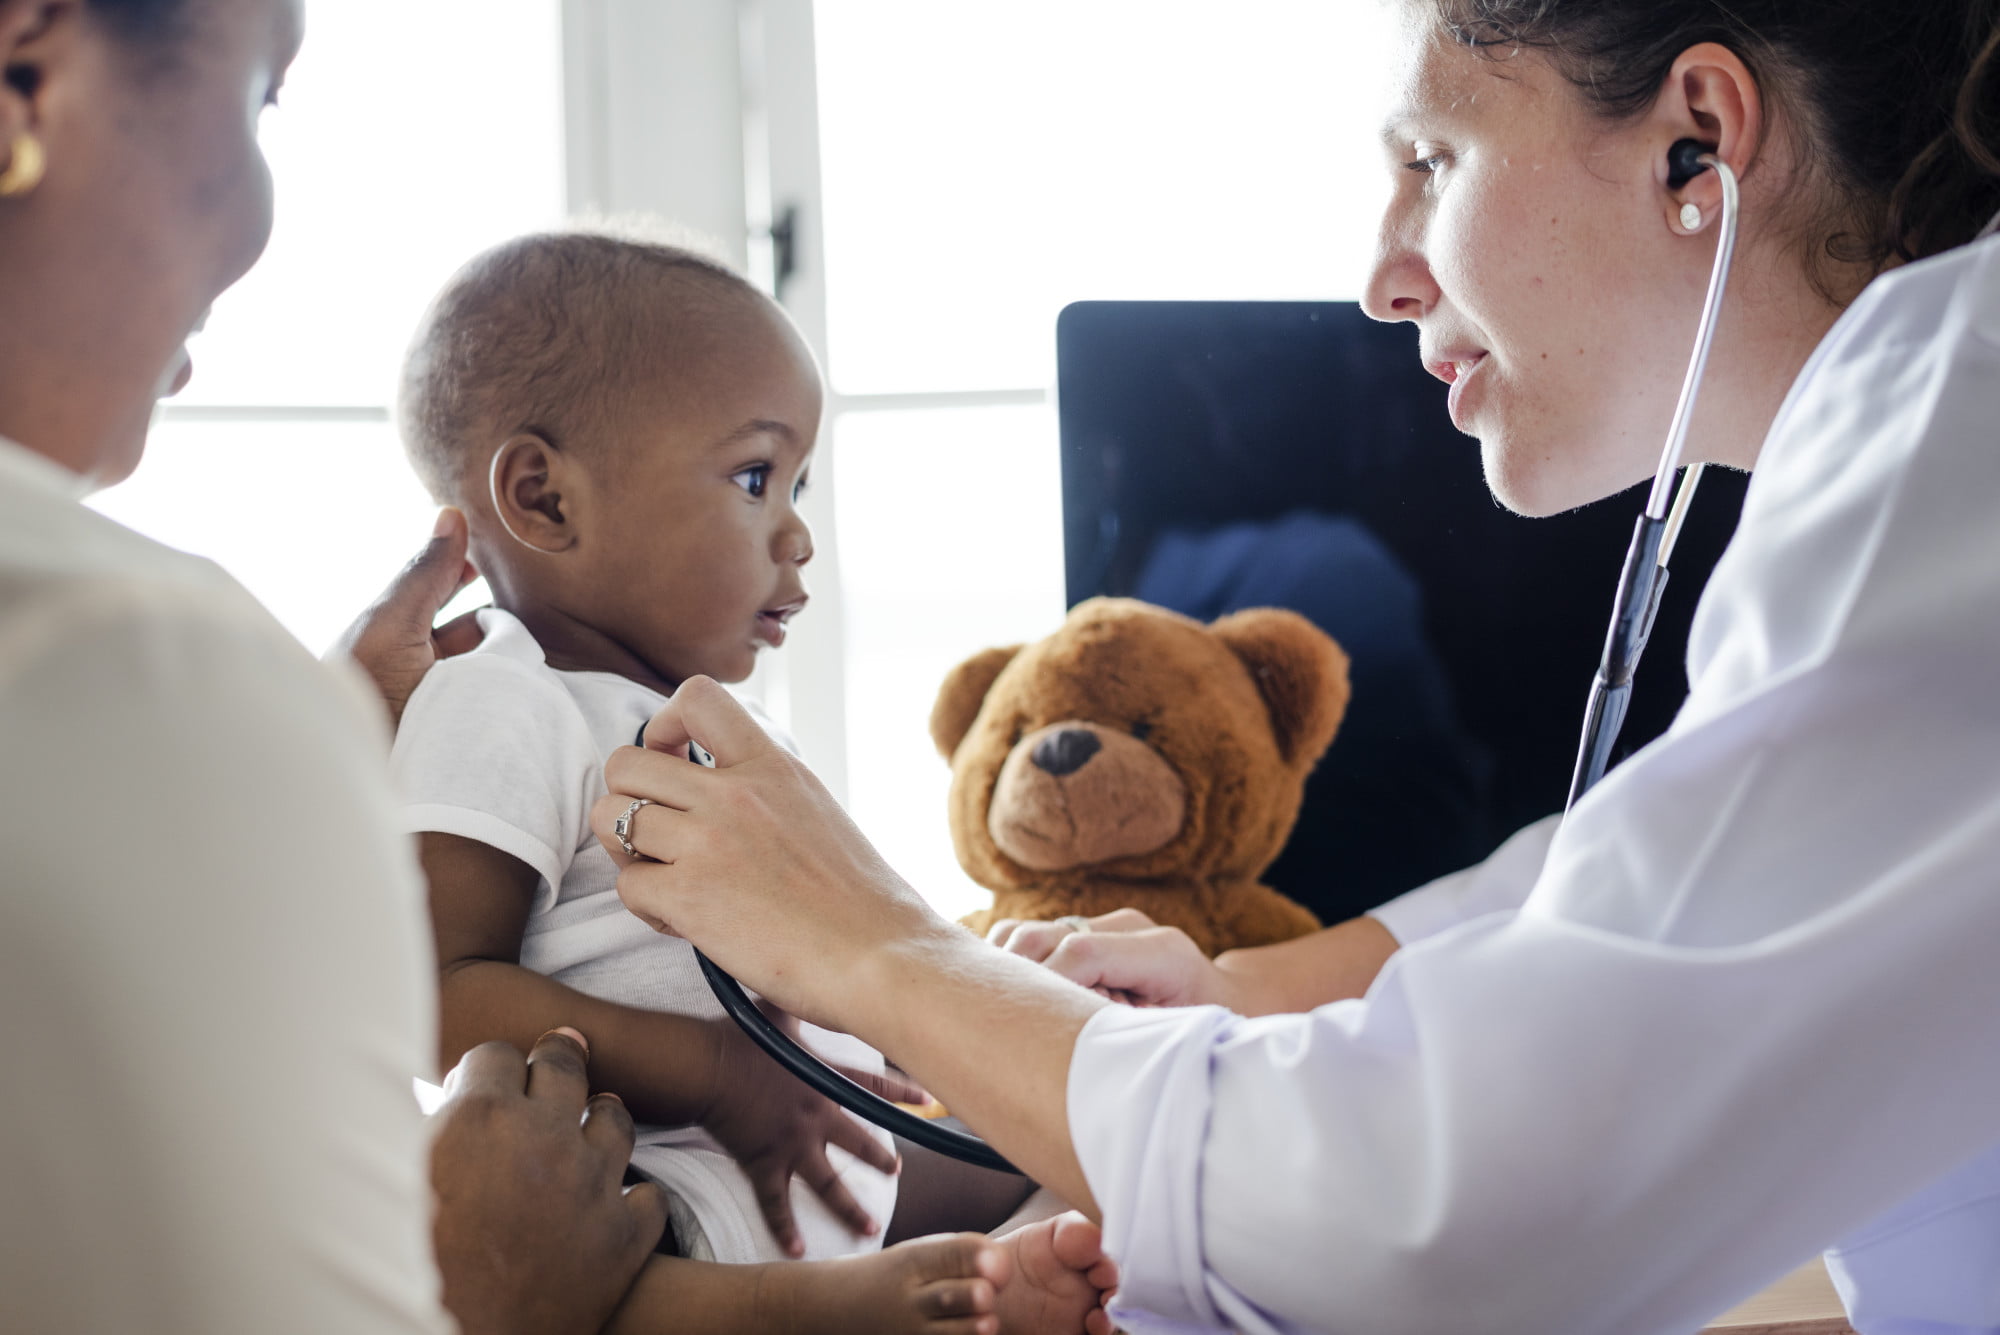 Pediatric doctors specialize in children's health, but how can you prevent your kids from having to visit them often? Learn how to keep your kids healthy here.